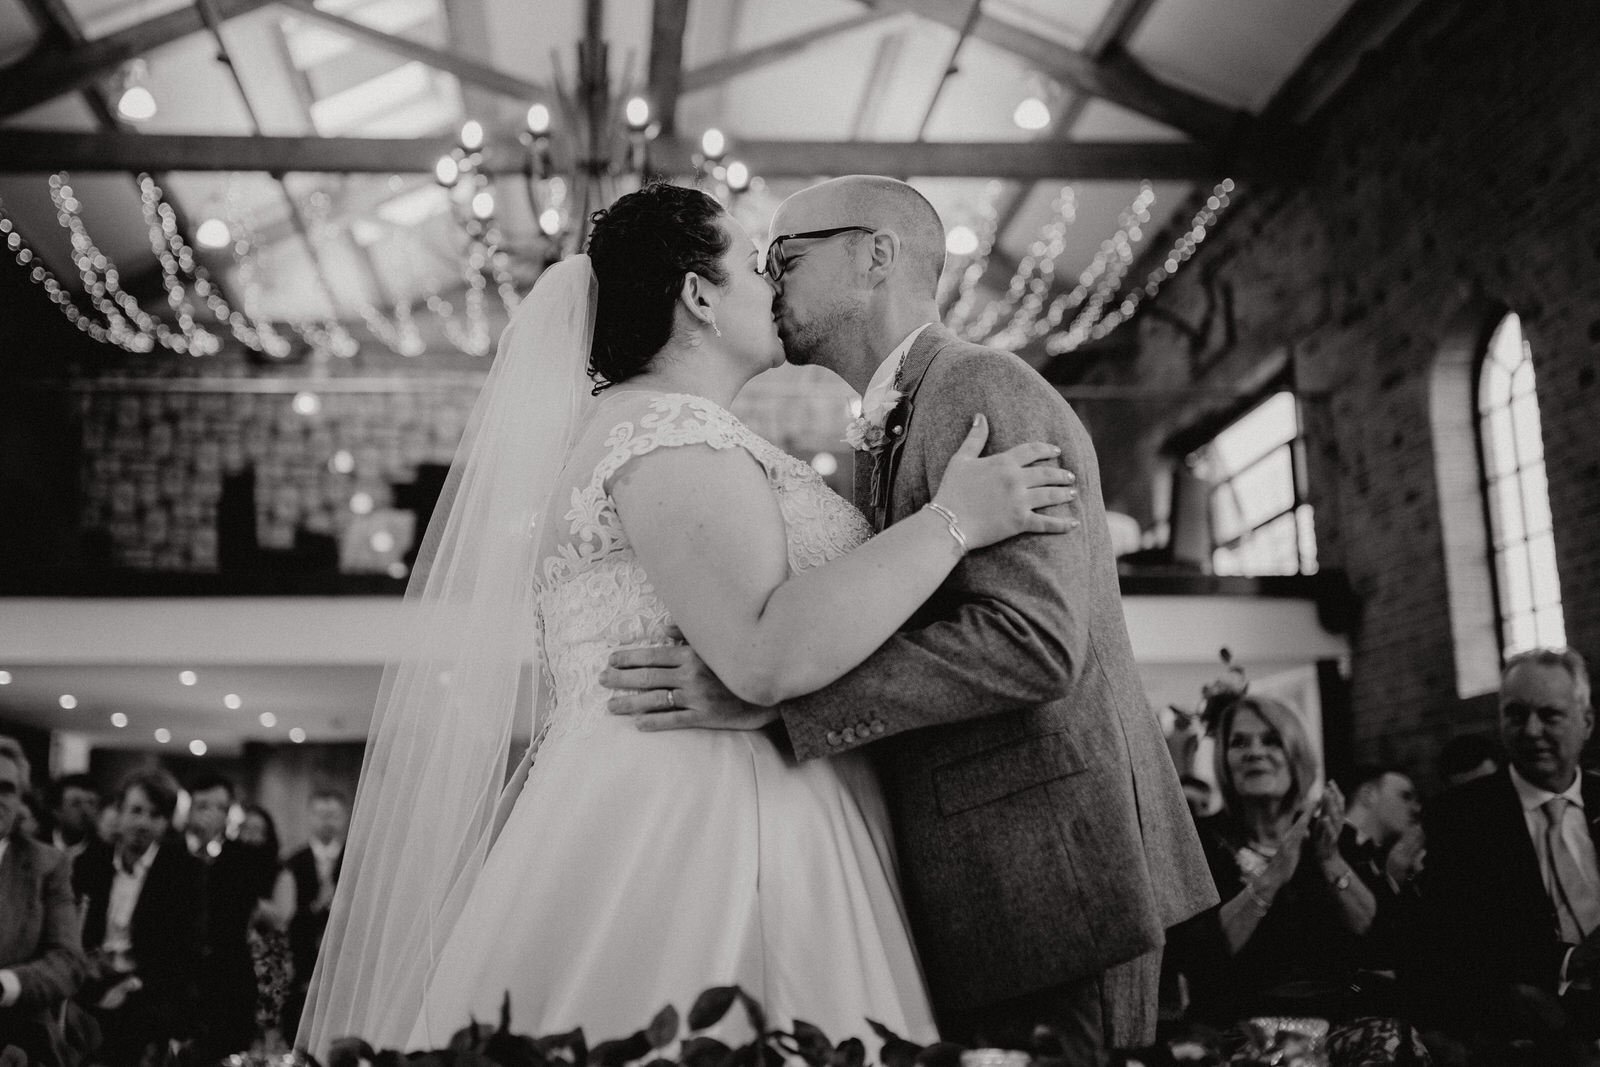 first kiss during wedding ceremony at the carriage hall, nottingham